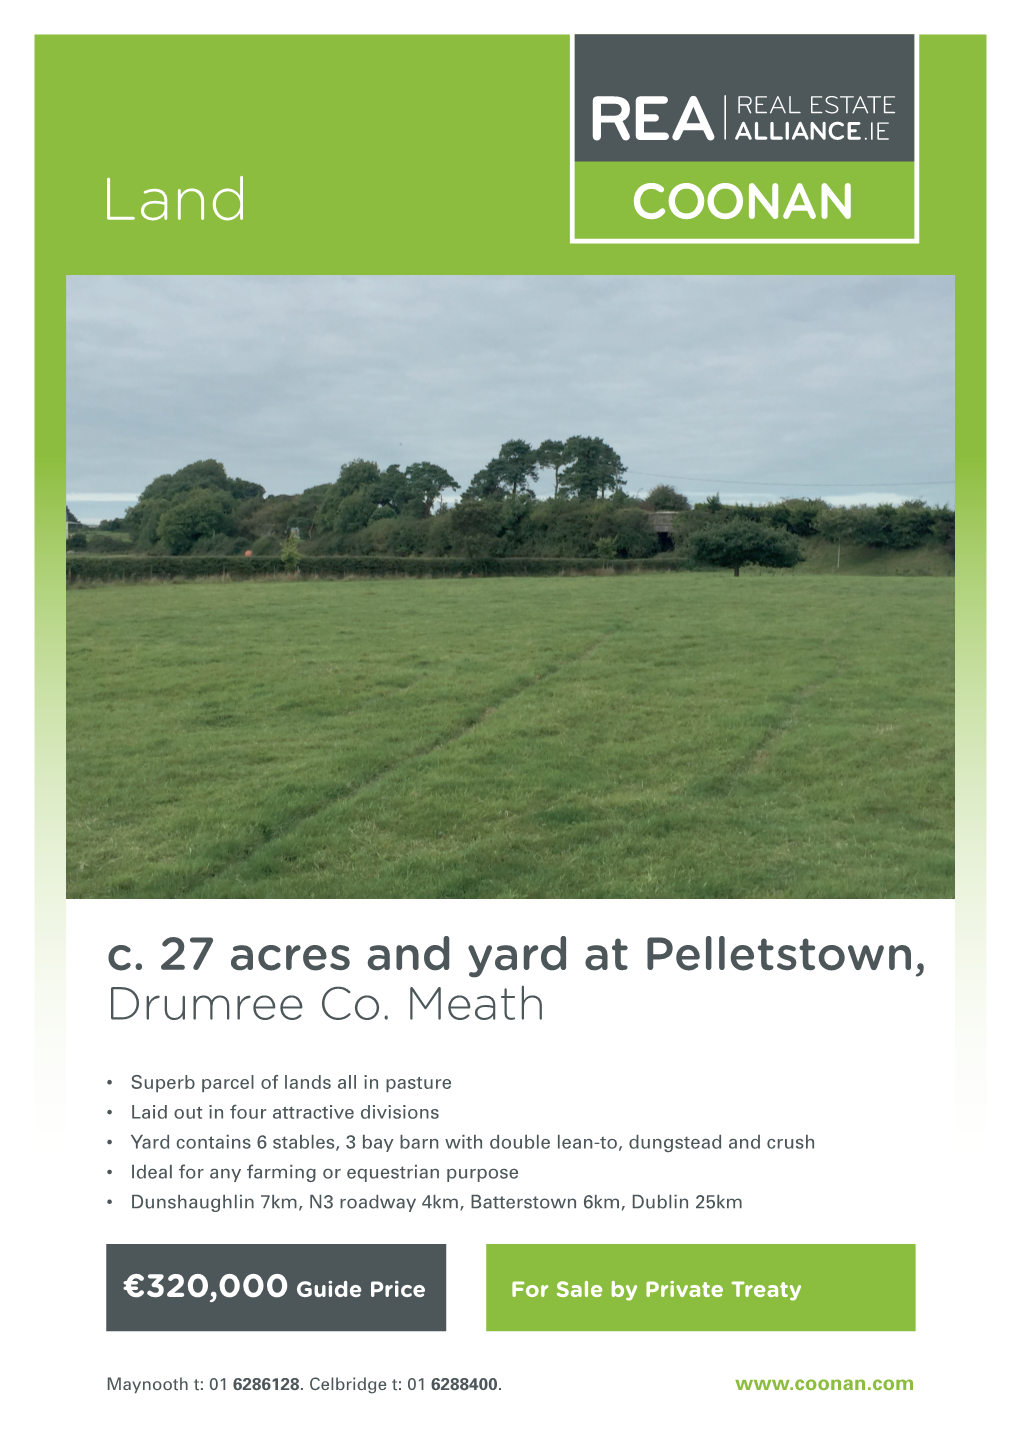 C. 27 Acres and Yard at Pelletstown, Drumree Co. Meath